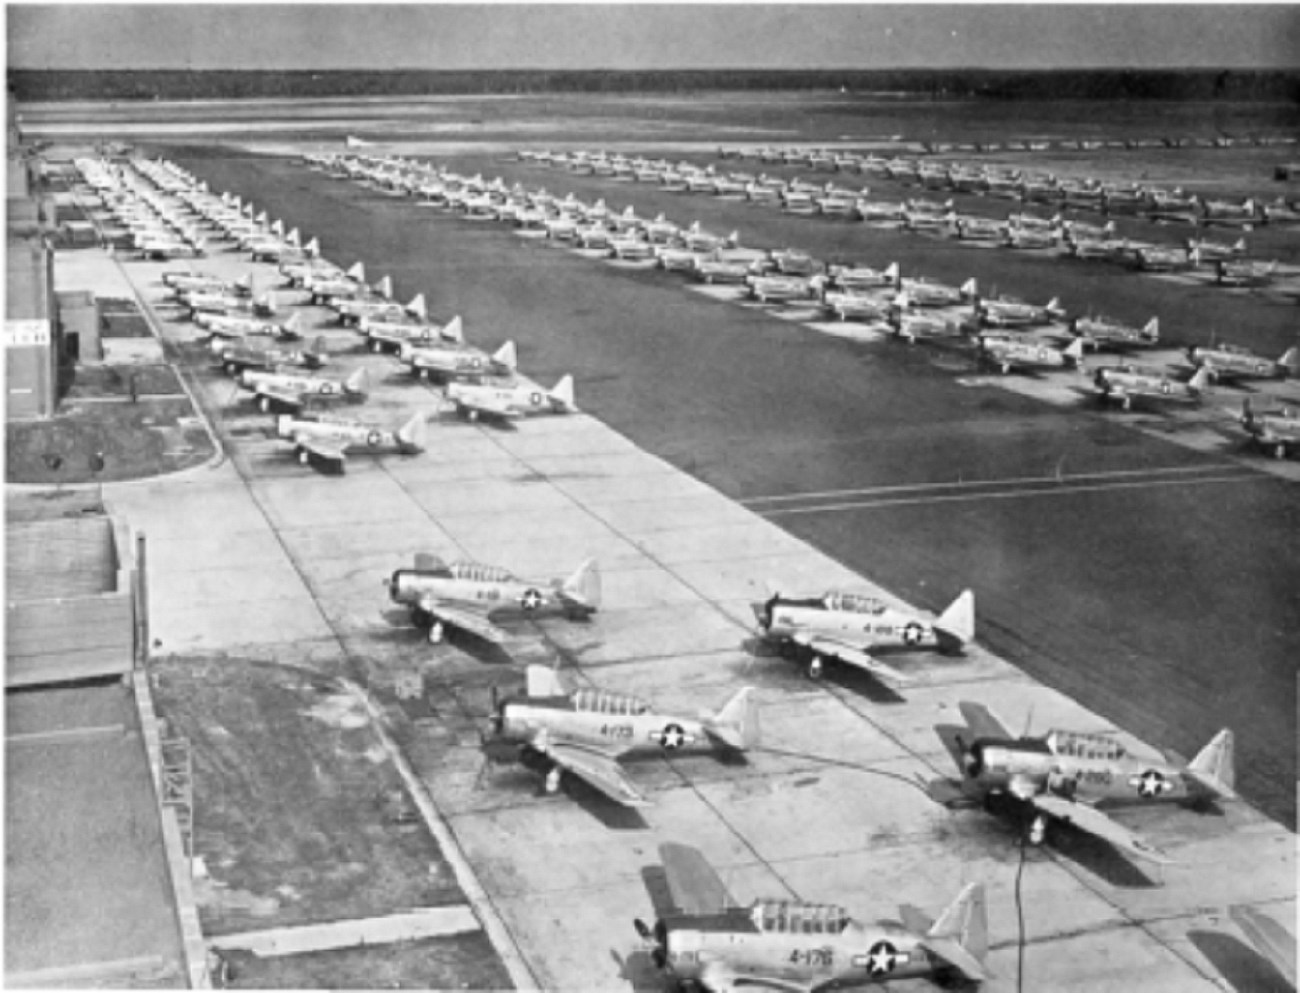 WWII planes lined up on a tarmac with hanger in the background